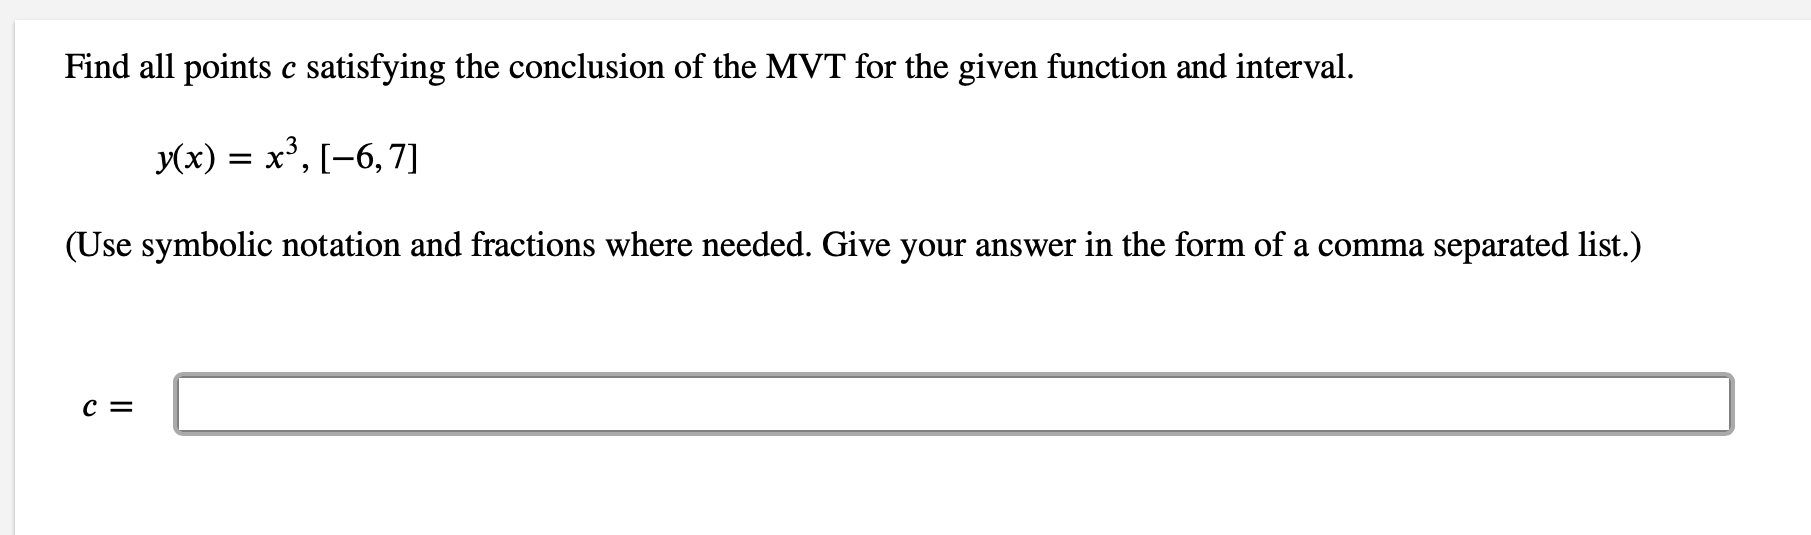 Find all points c satisfying the conclusion of the MVT for the given function and interval.
Ух) %3 х3, [-6, 7]
(Use symbolic notation and fractions where needed. Give your answer in the form of a comma separated list.)
C =
